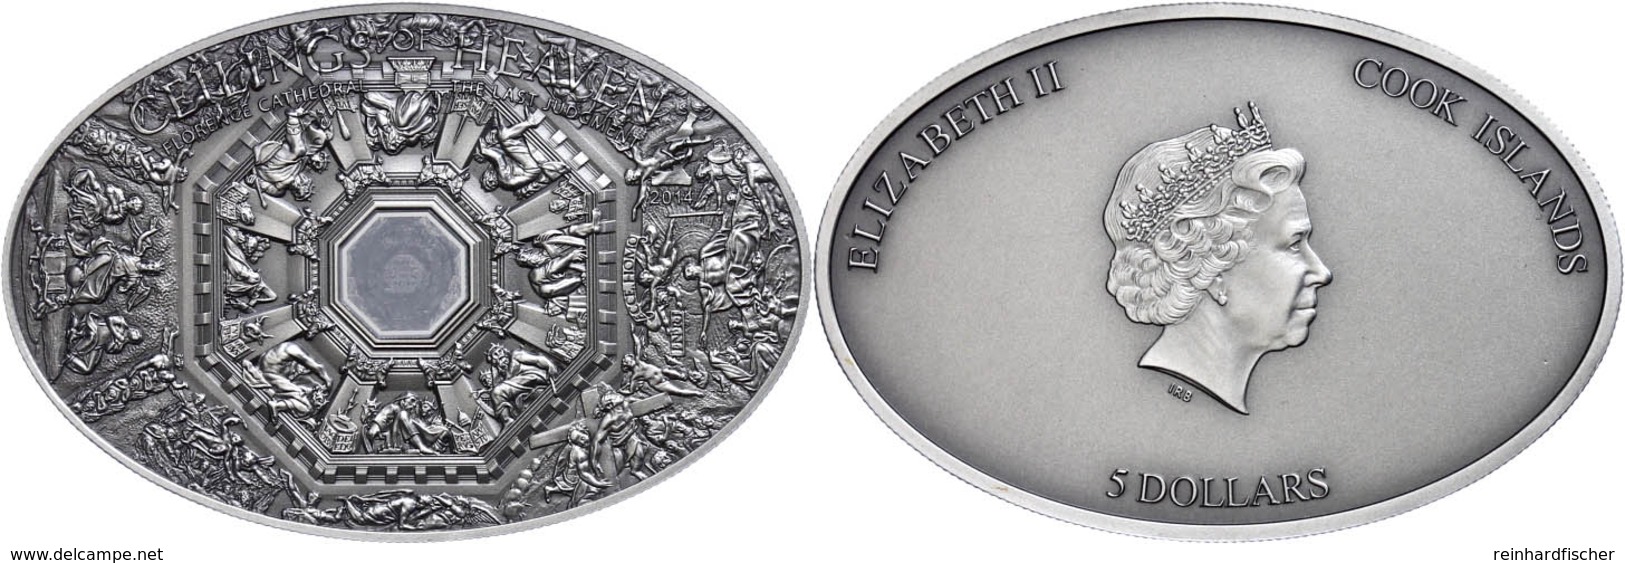 5 Dollars, 2014, Ceilings Of Heaven, Florence Cathedral, 999er Silber, Antik Finish, Stein, In Kapsel Mit Zertifikat, St - Cook Islands